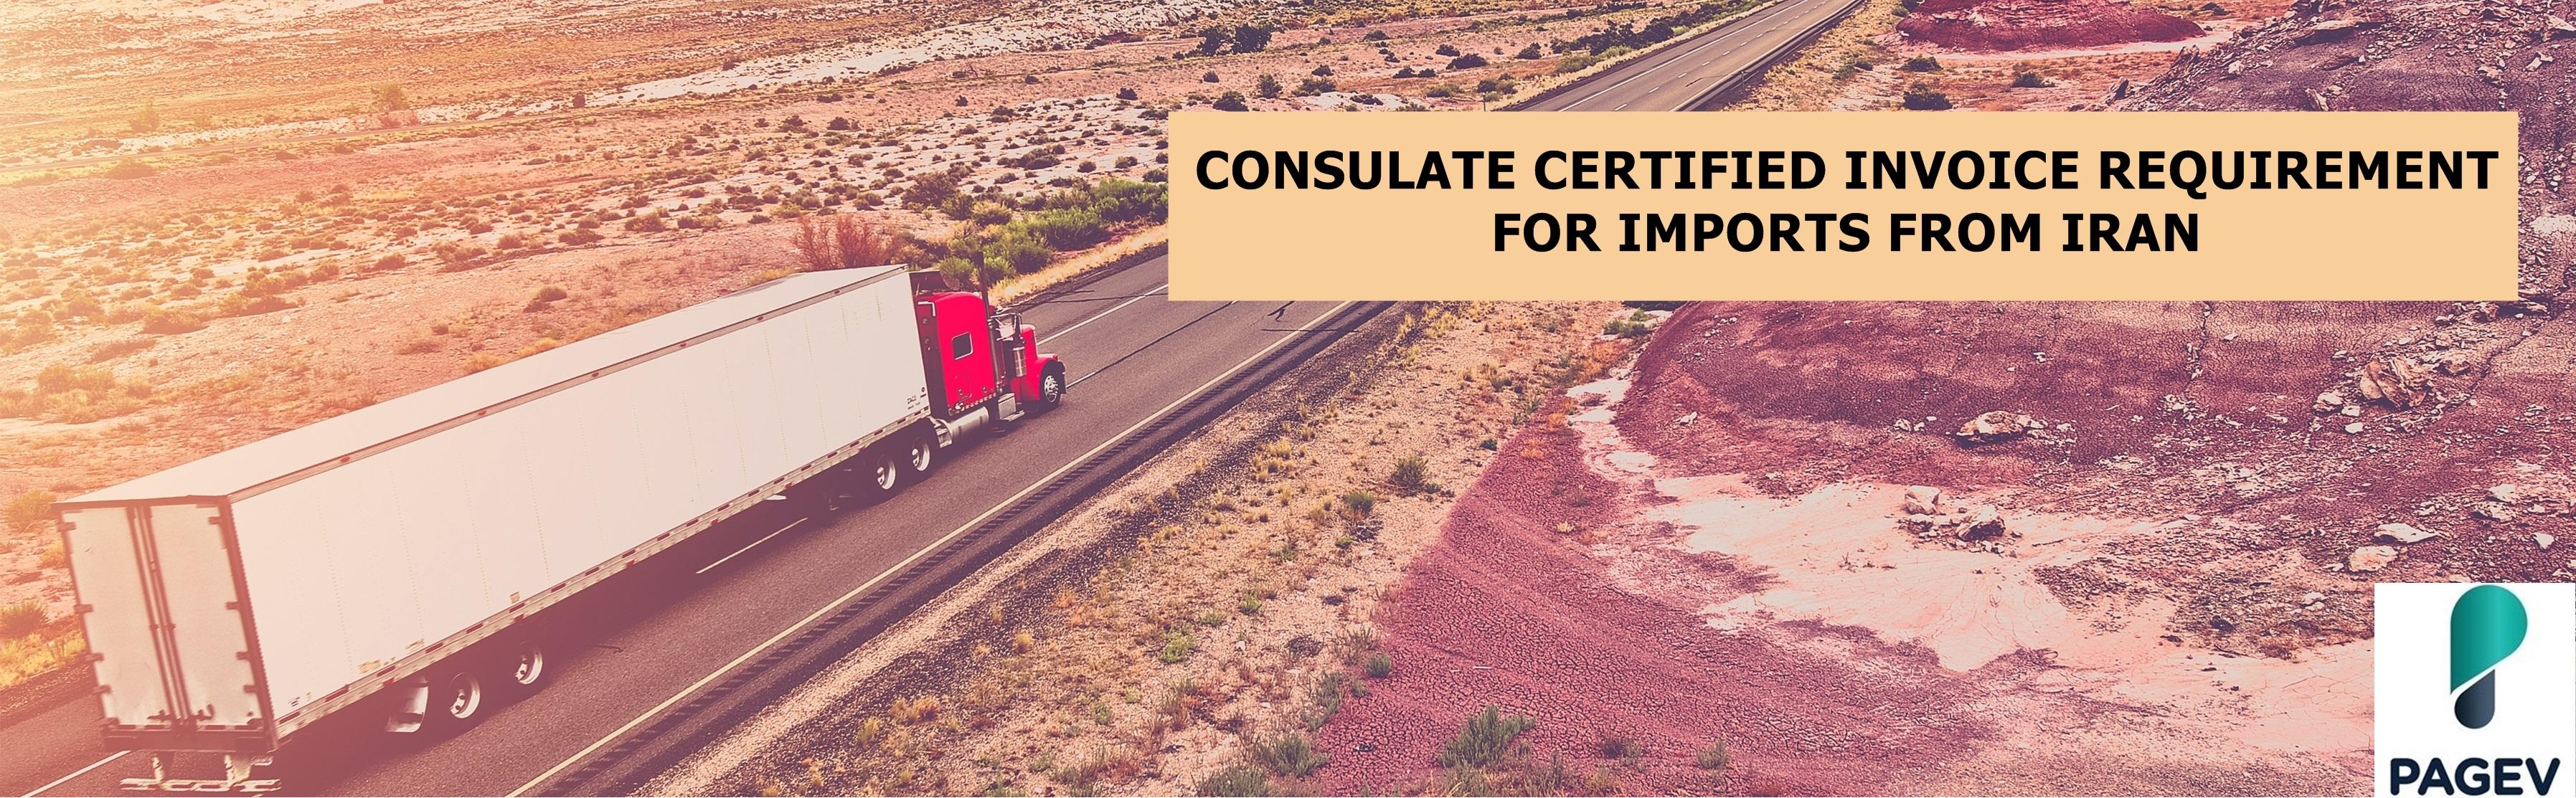 CONSULATE CERTIFIED INVOICE REQUIREMENT FOR IMPORTS FROM IRAN